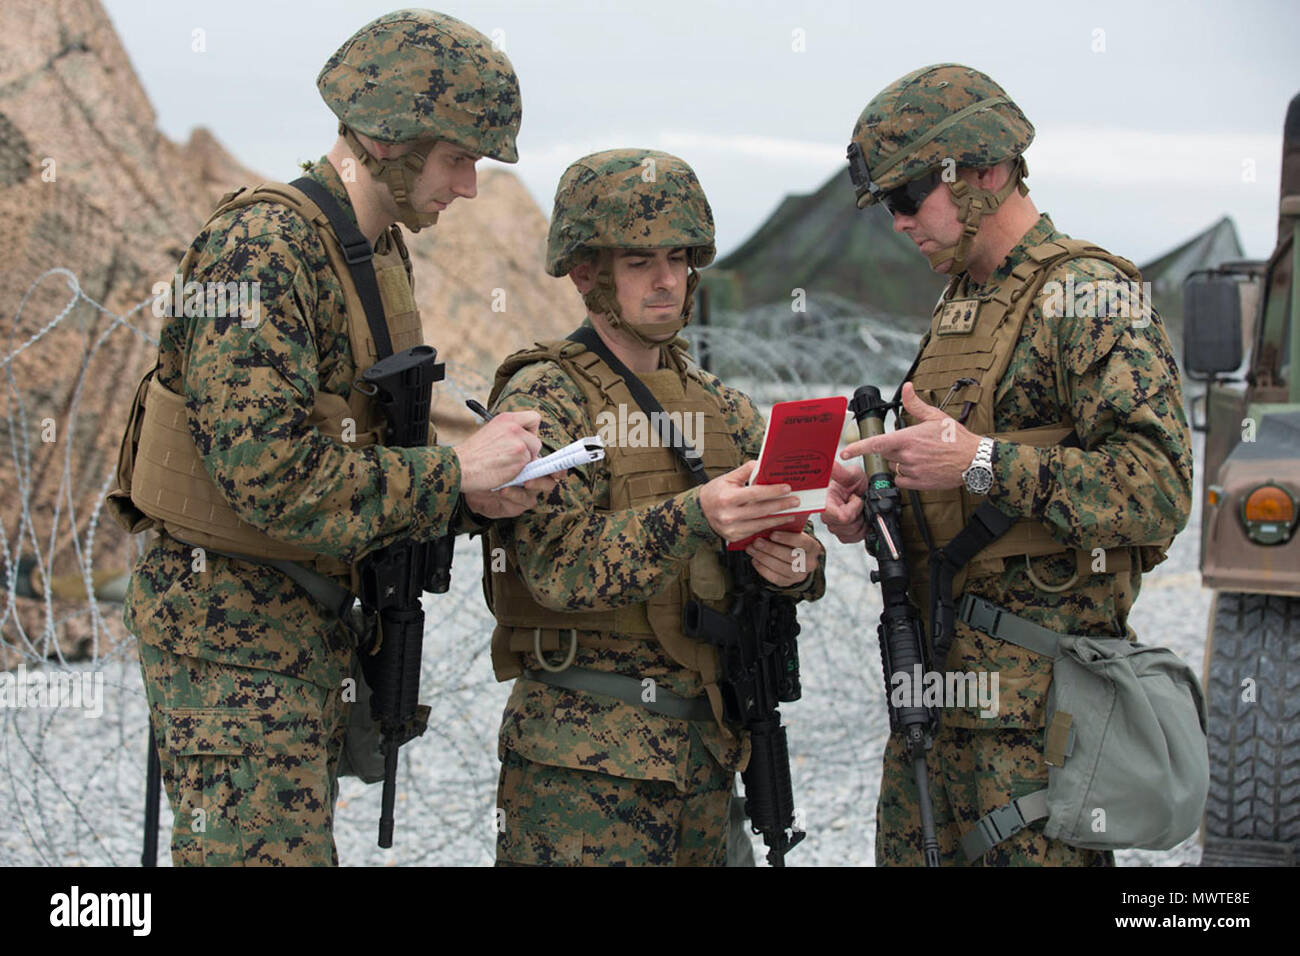 U.S. Marine Corps Capt. Richards Phillips (left) , Maj. Christian Palmer (center), Lieutenant Col. Scott Morrison (right) with Civil Affairs G-9,  III Marine Headquarters Group (III MHG), looking through their field operations guide during Marine Expeditionary Force Exercise 2017 (MEFEX 17) at Range GP 304 on Marine Corps Base Camp Hansen, Okinawa, Japan, April 27, 2017. MEFEX 17, a command and control exercise conducted in a simulated deployed environment, is designed to synchronize and bring to bear the full spectrum of III MEF, while remaining ready to provide the Marine Corps with an exper Stock Photo